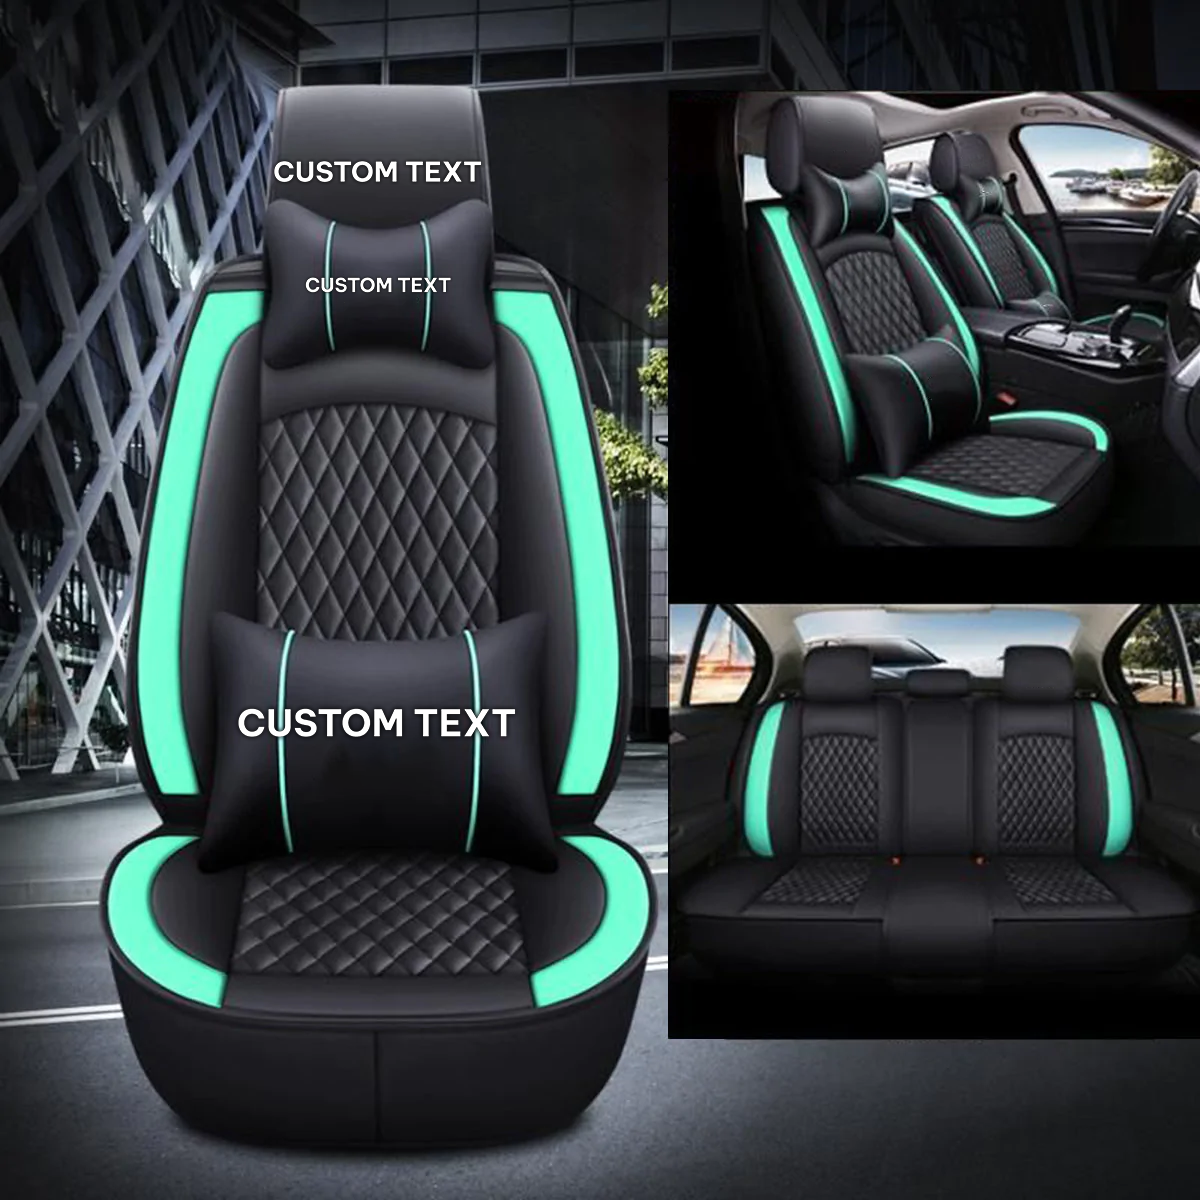 Custom Text For Seat Covers 5 Seats Full Set, Custom Fit For Your Cars, Leatherette Automotive Seat Cushion Protector Universal Fit, Vehicle Auto Interior Decor KO13988